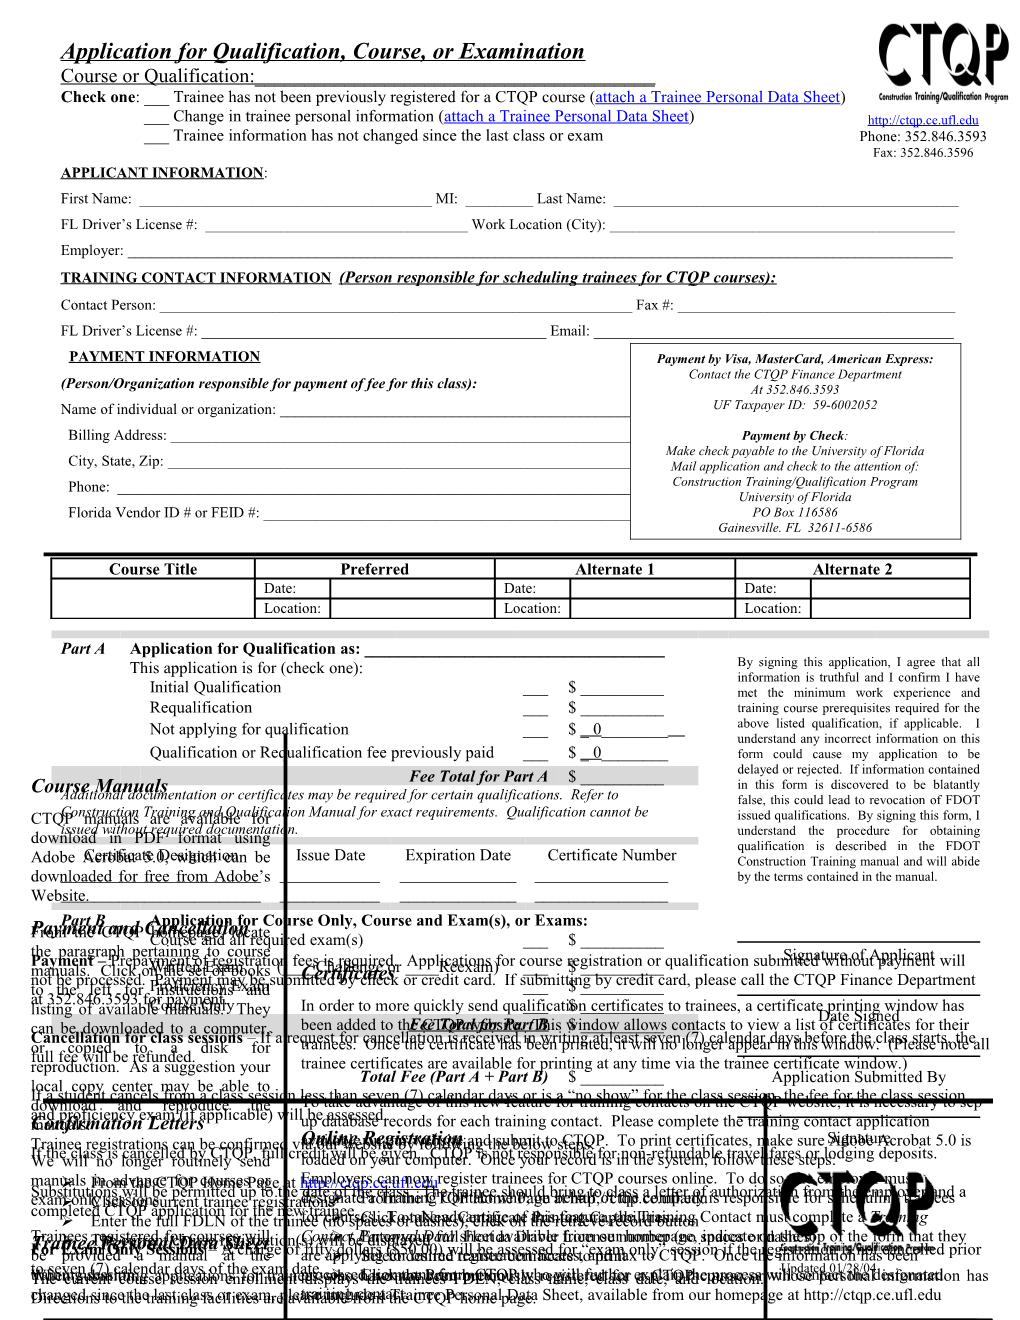 Application for Qualification, Course, Or Examination